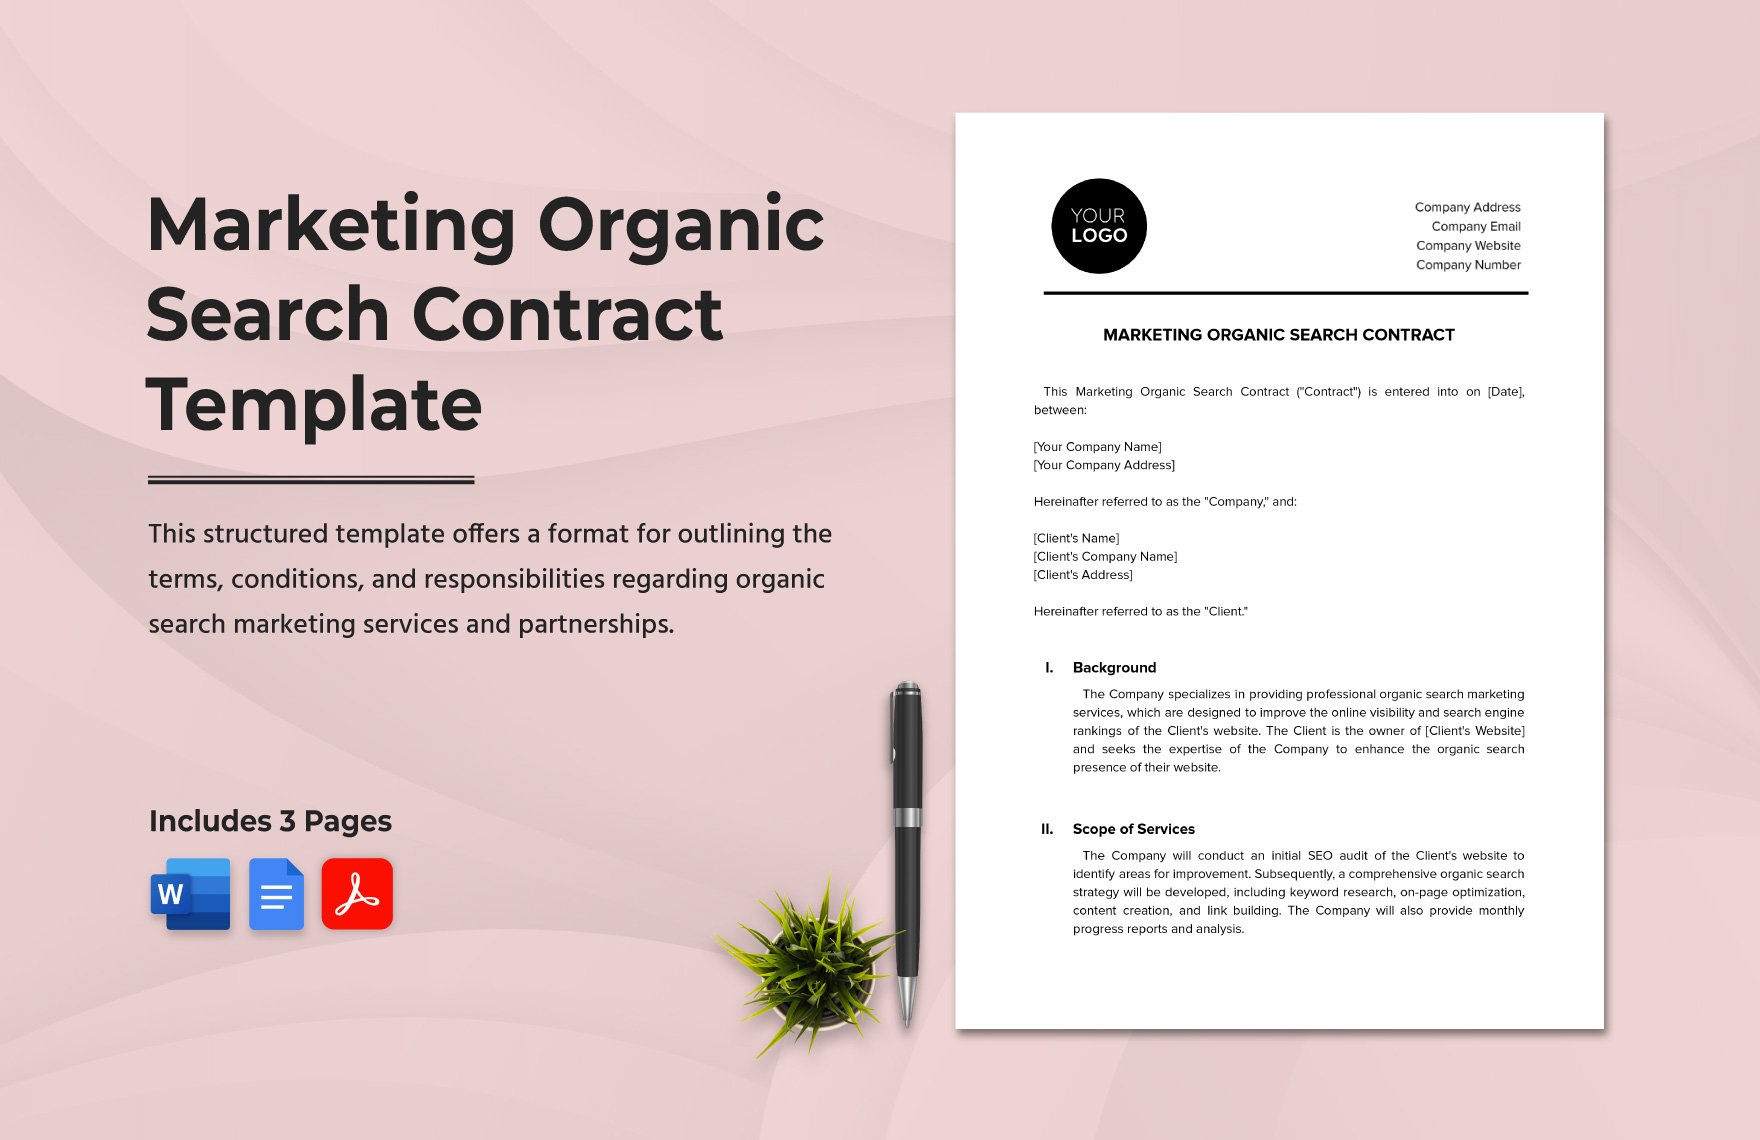 Marketing Organic Search Contract Template in Word, Google Docs, PDF